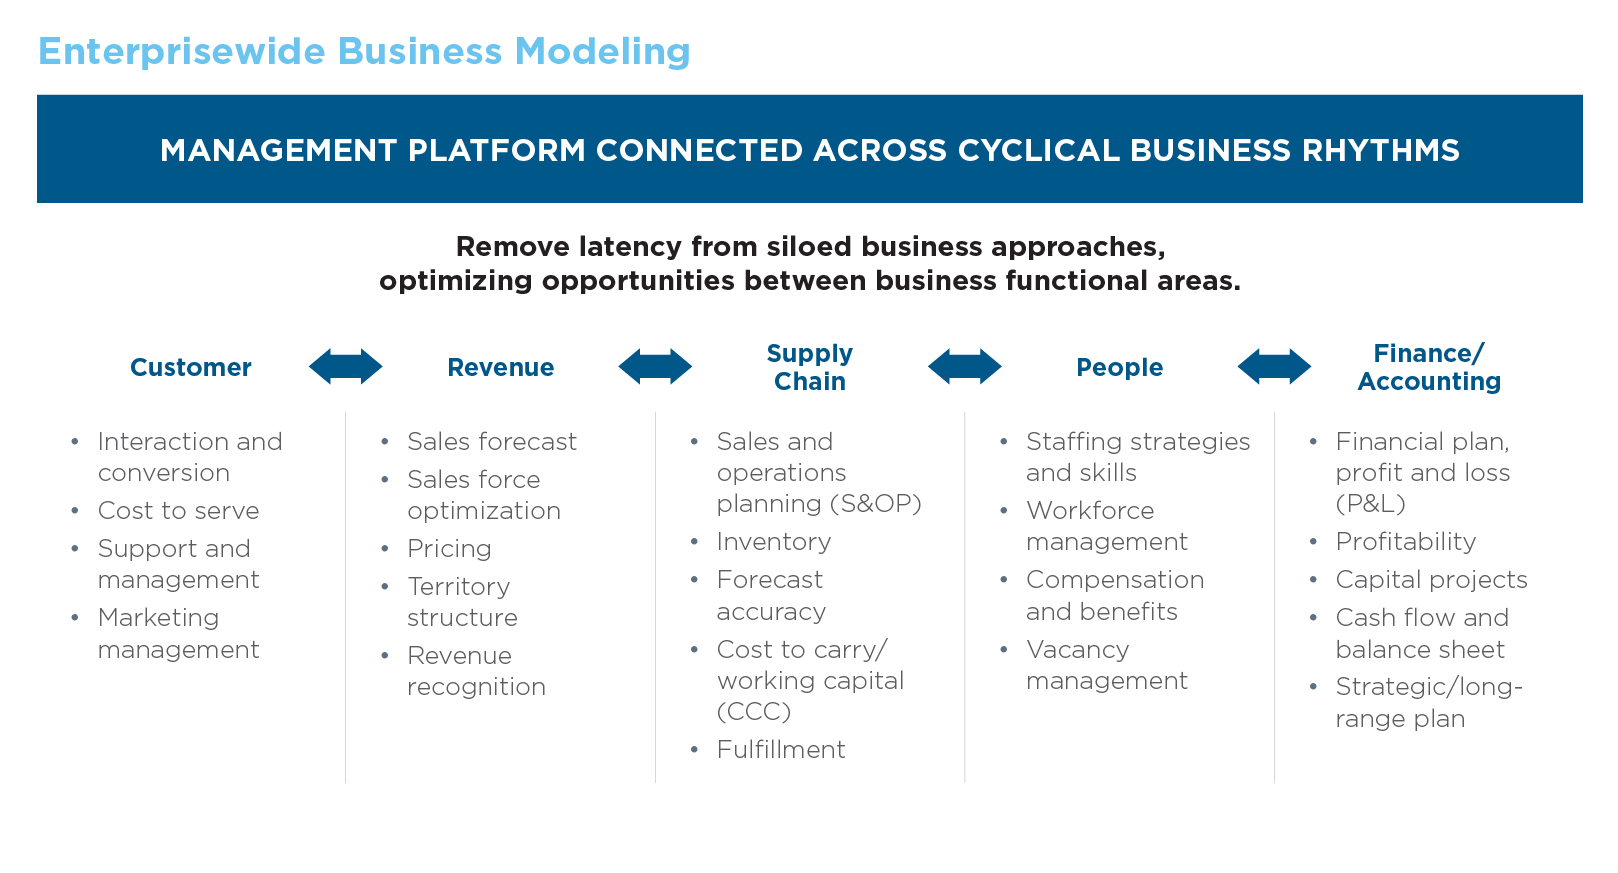 A table describing enterprisewide business modeling and how the management platform is connected across cyclical business rhythms.